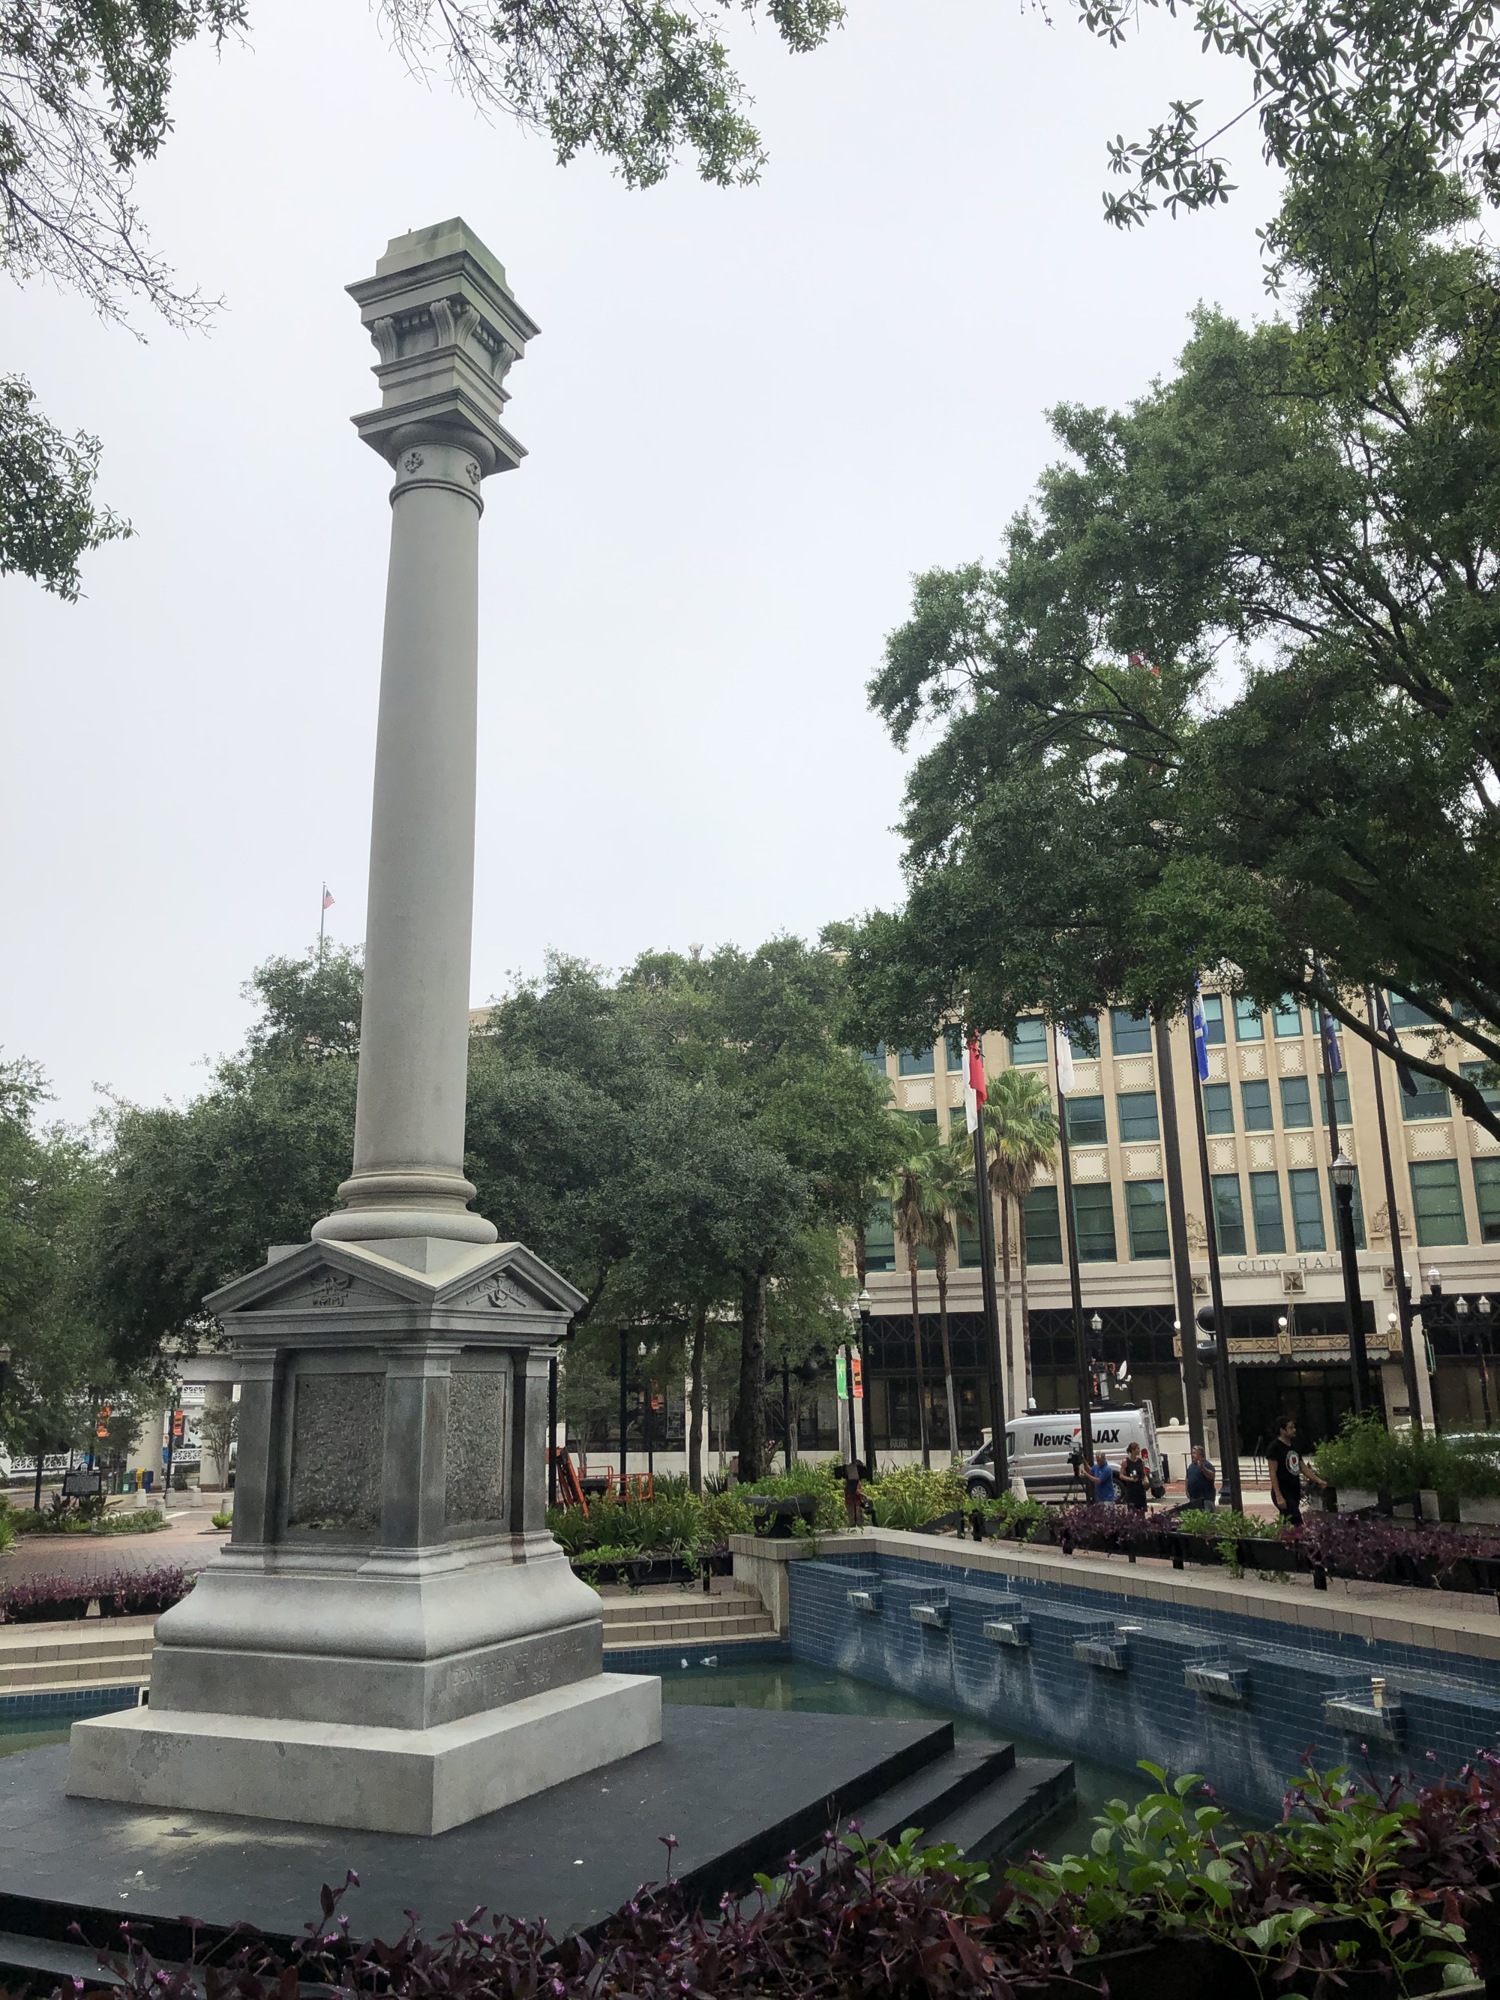 The park was named for Charles Hemming in 1899, the year after he donated the monument as a memorial to soldiers and sailors from Florida who served during the Civil War.